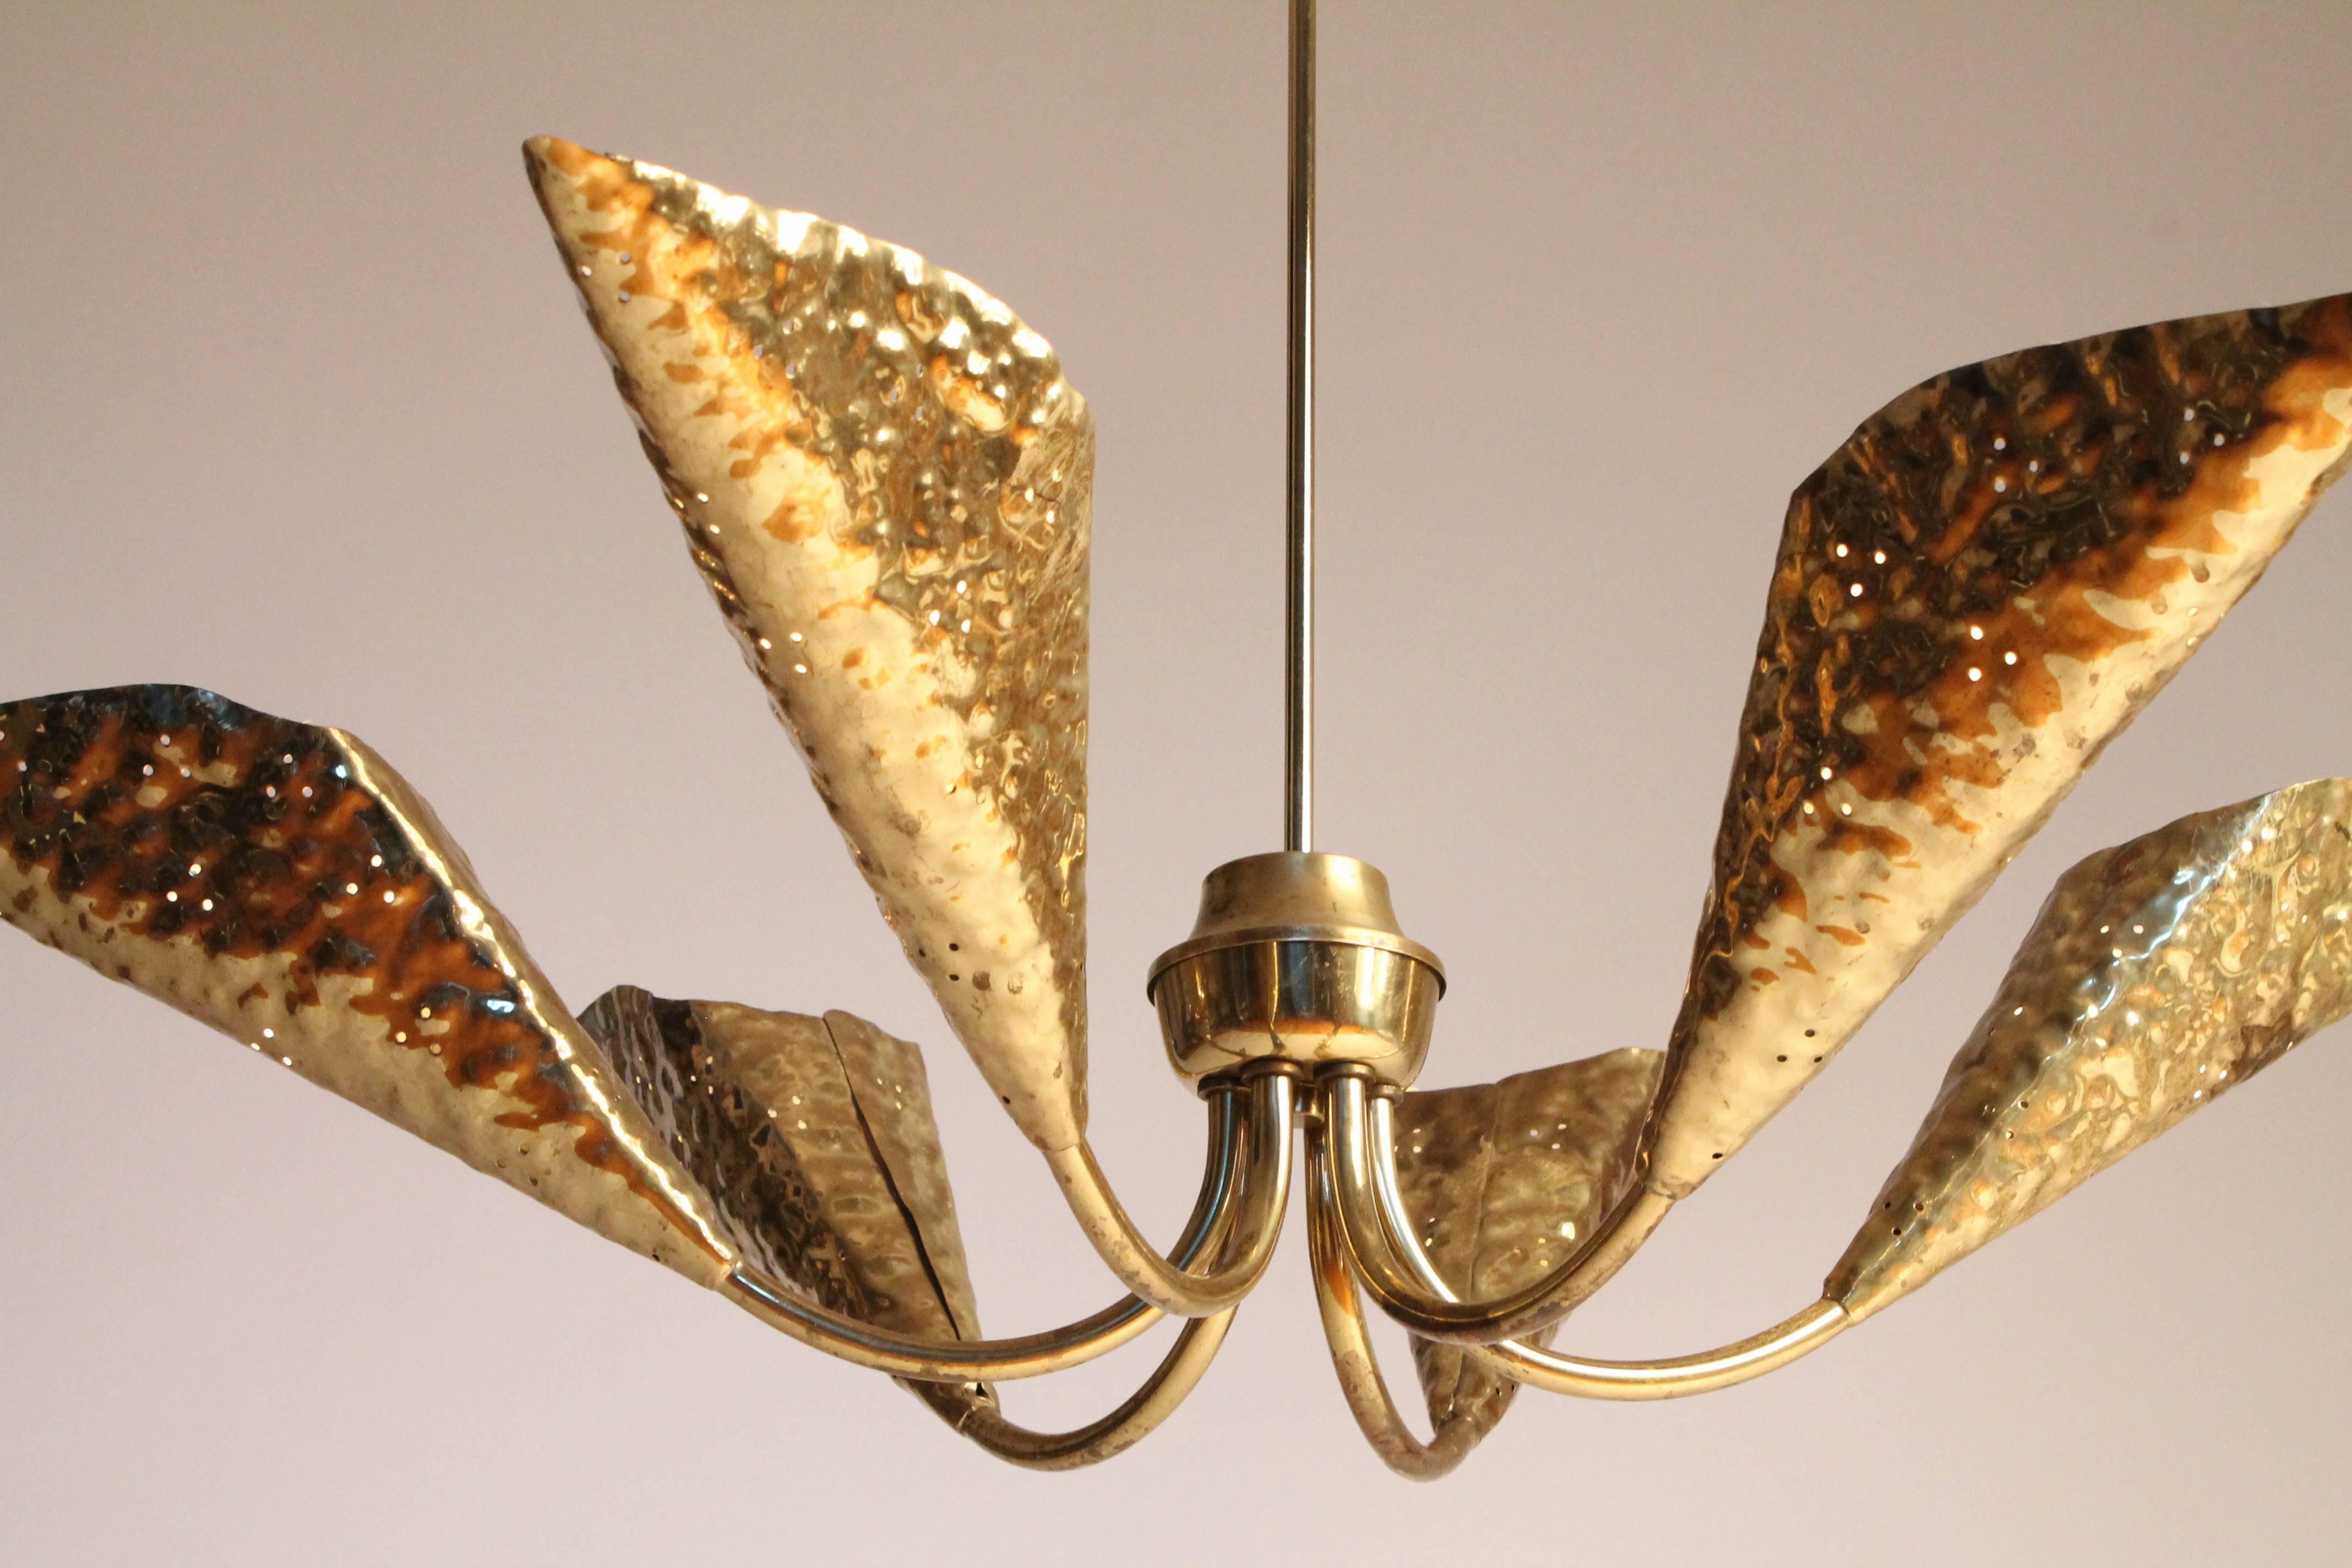 Mid-Century Modern Hand-Hammered Six-Arm Brass Chandelier in the style of Arredoluce , 1950s, Italy